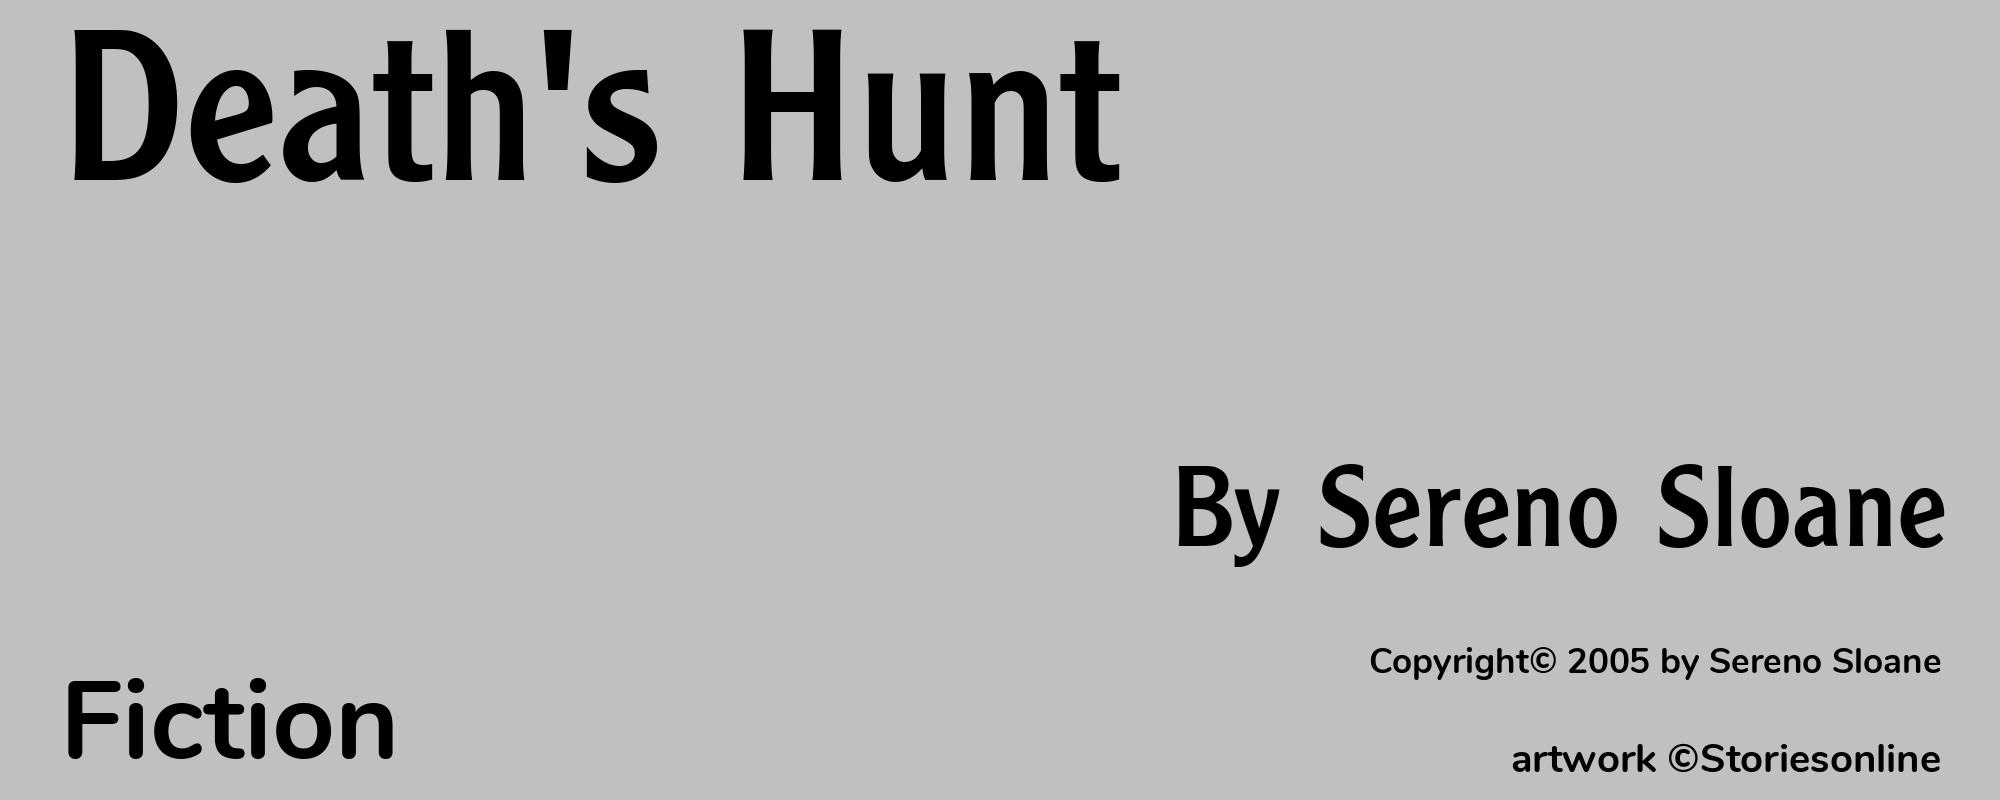 Death's Hunt - Cover